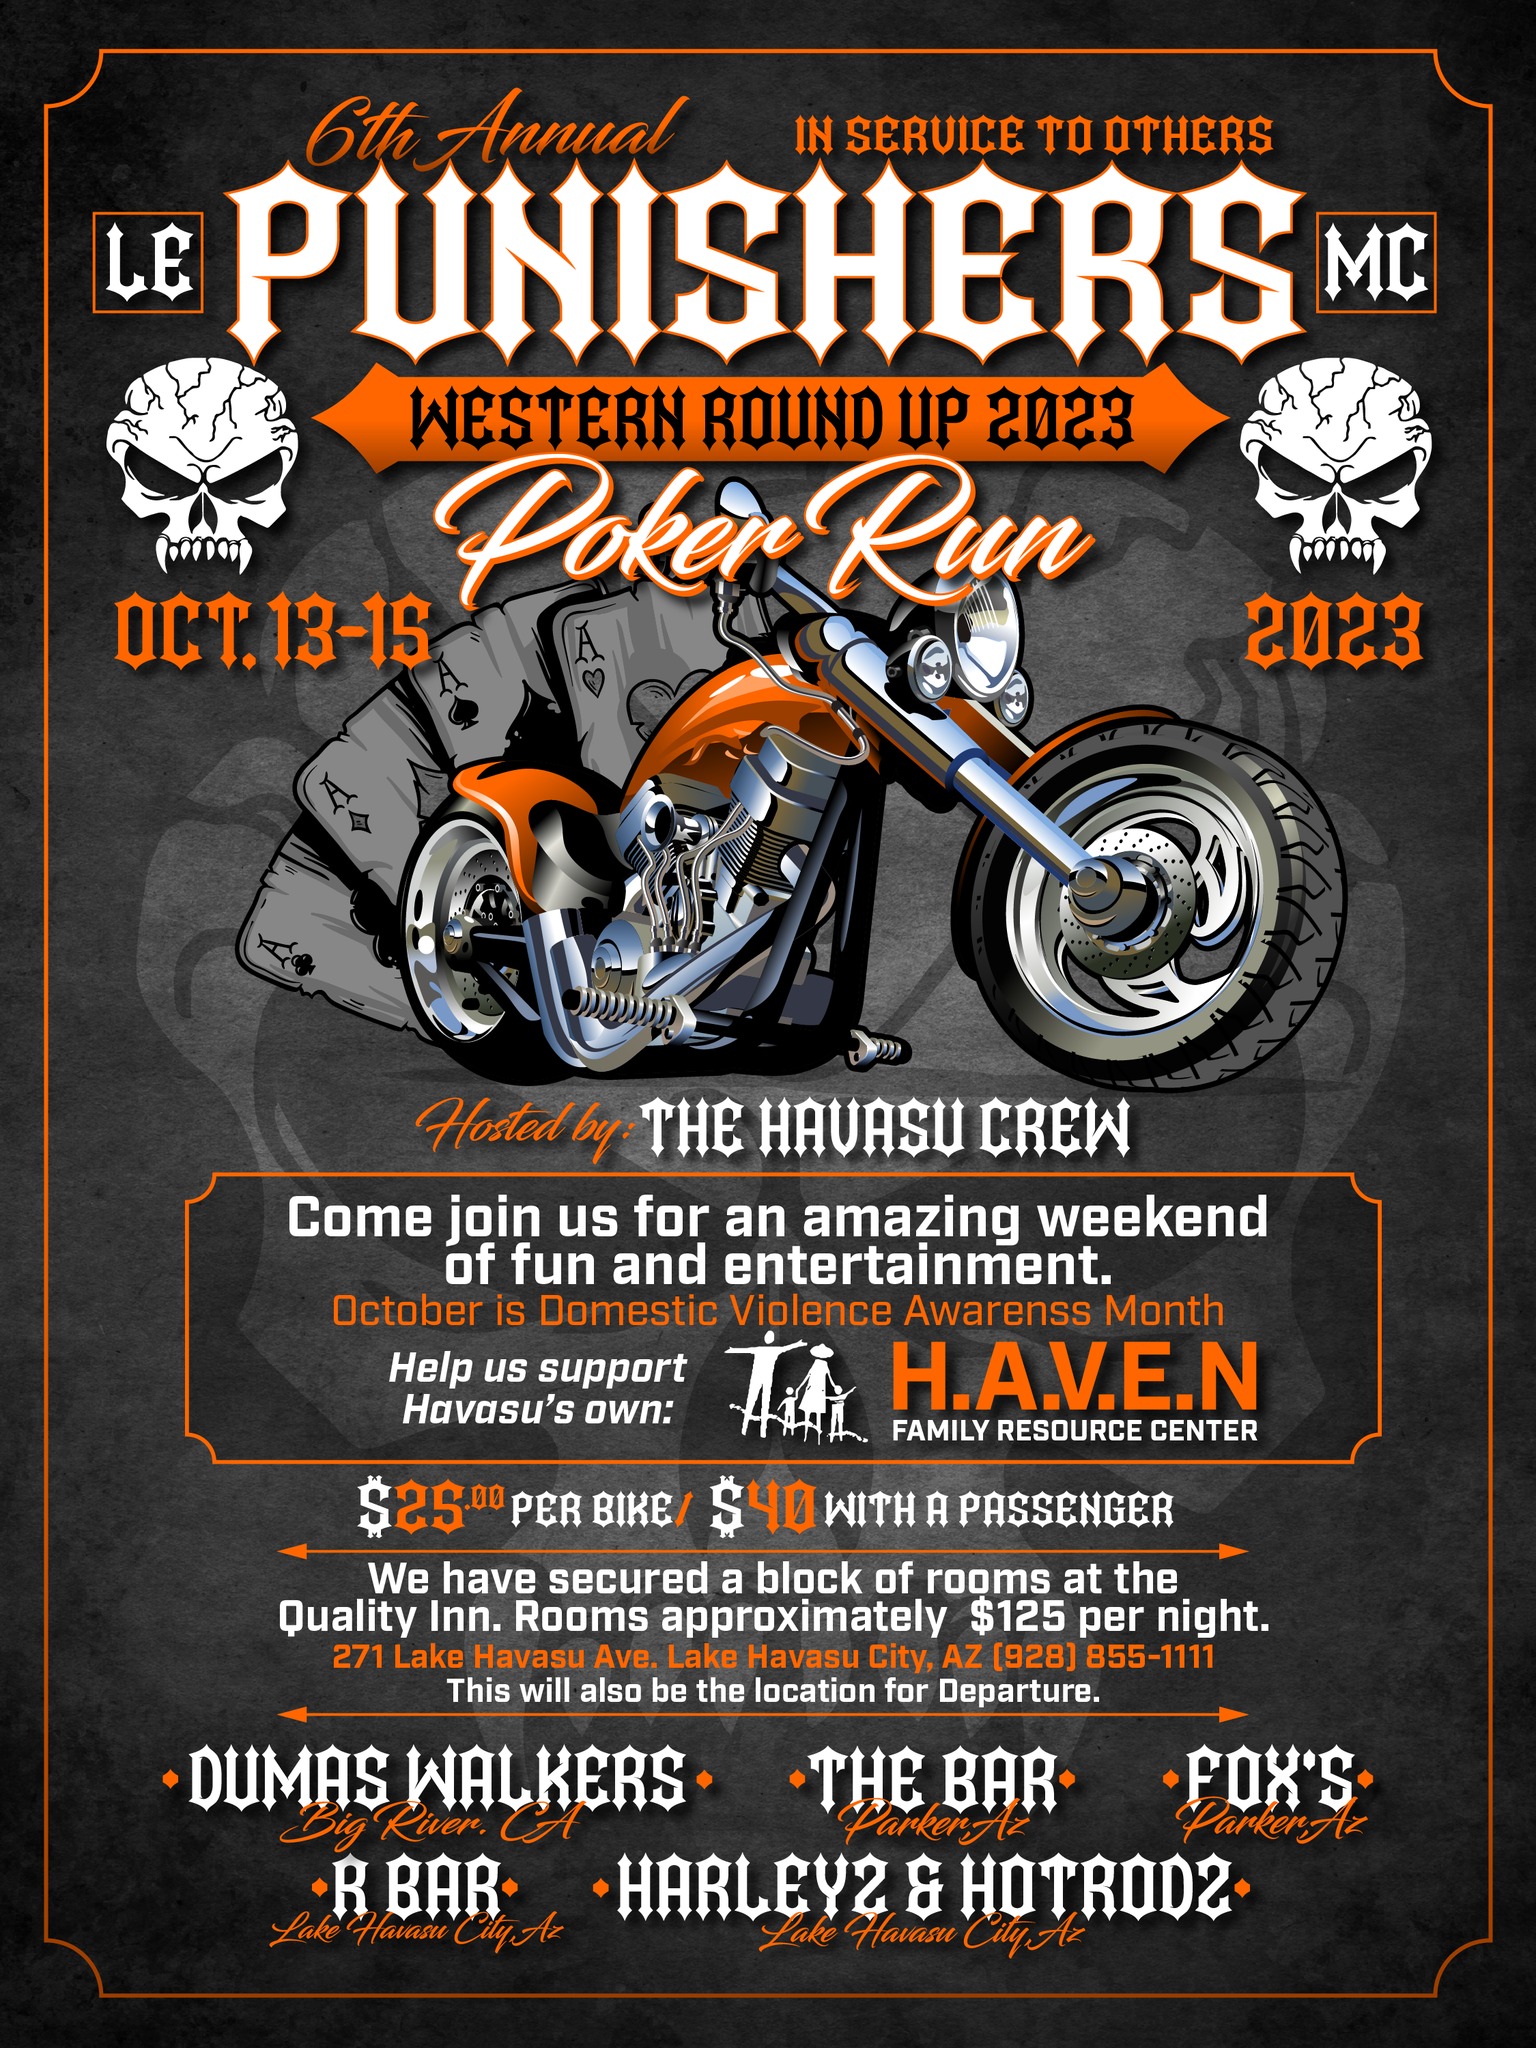 H.A.V.E.N. House Poker Run   Hosted by Punishers LE MC